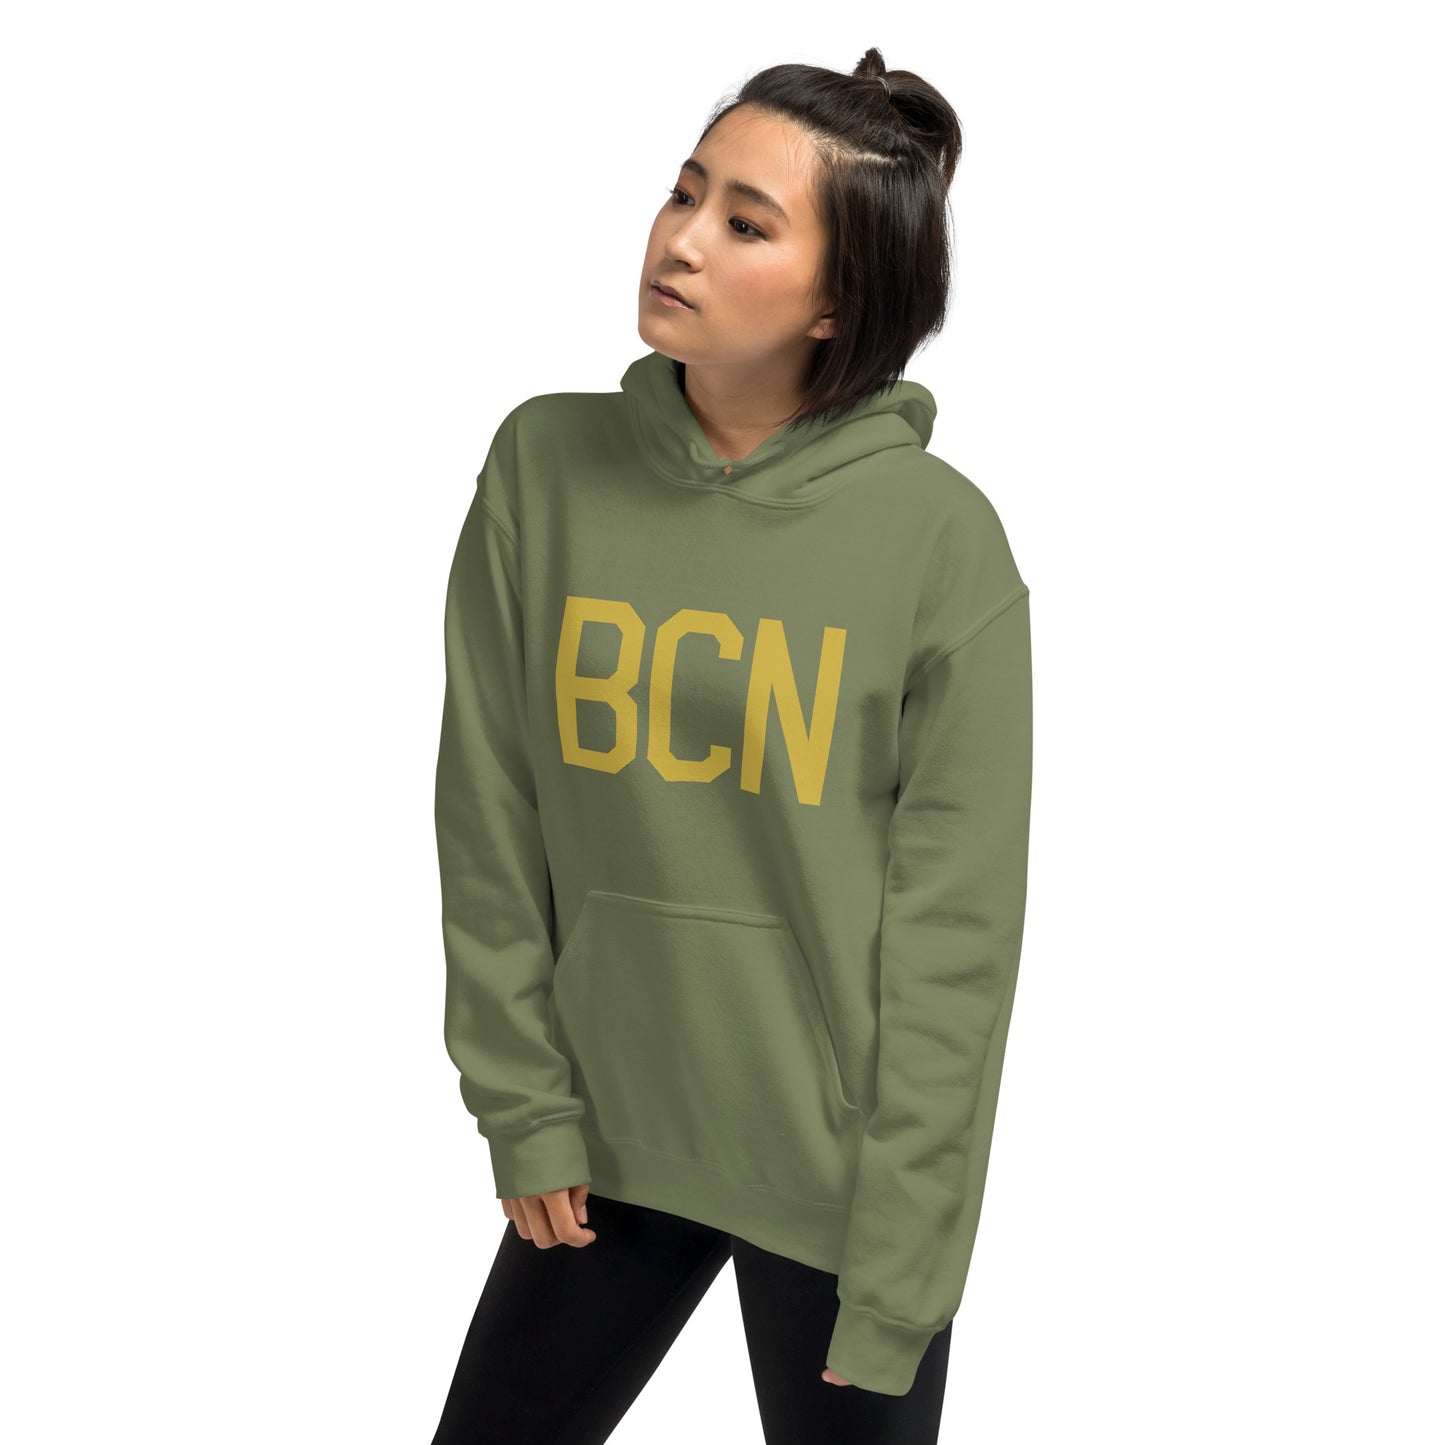 Aviation Gift Unisex Hoodie - Old Gold Graphic • BCN Barcelona • YHM Designs - Image 10